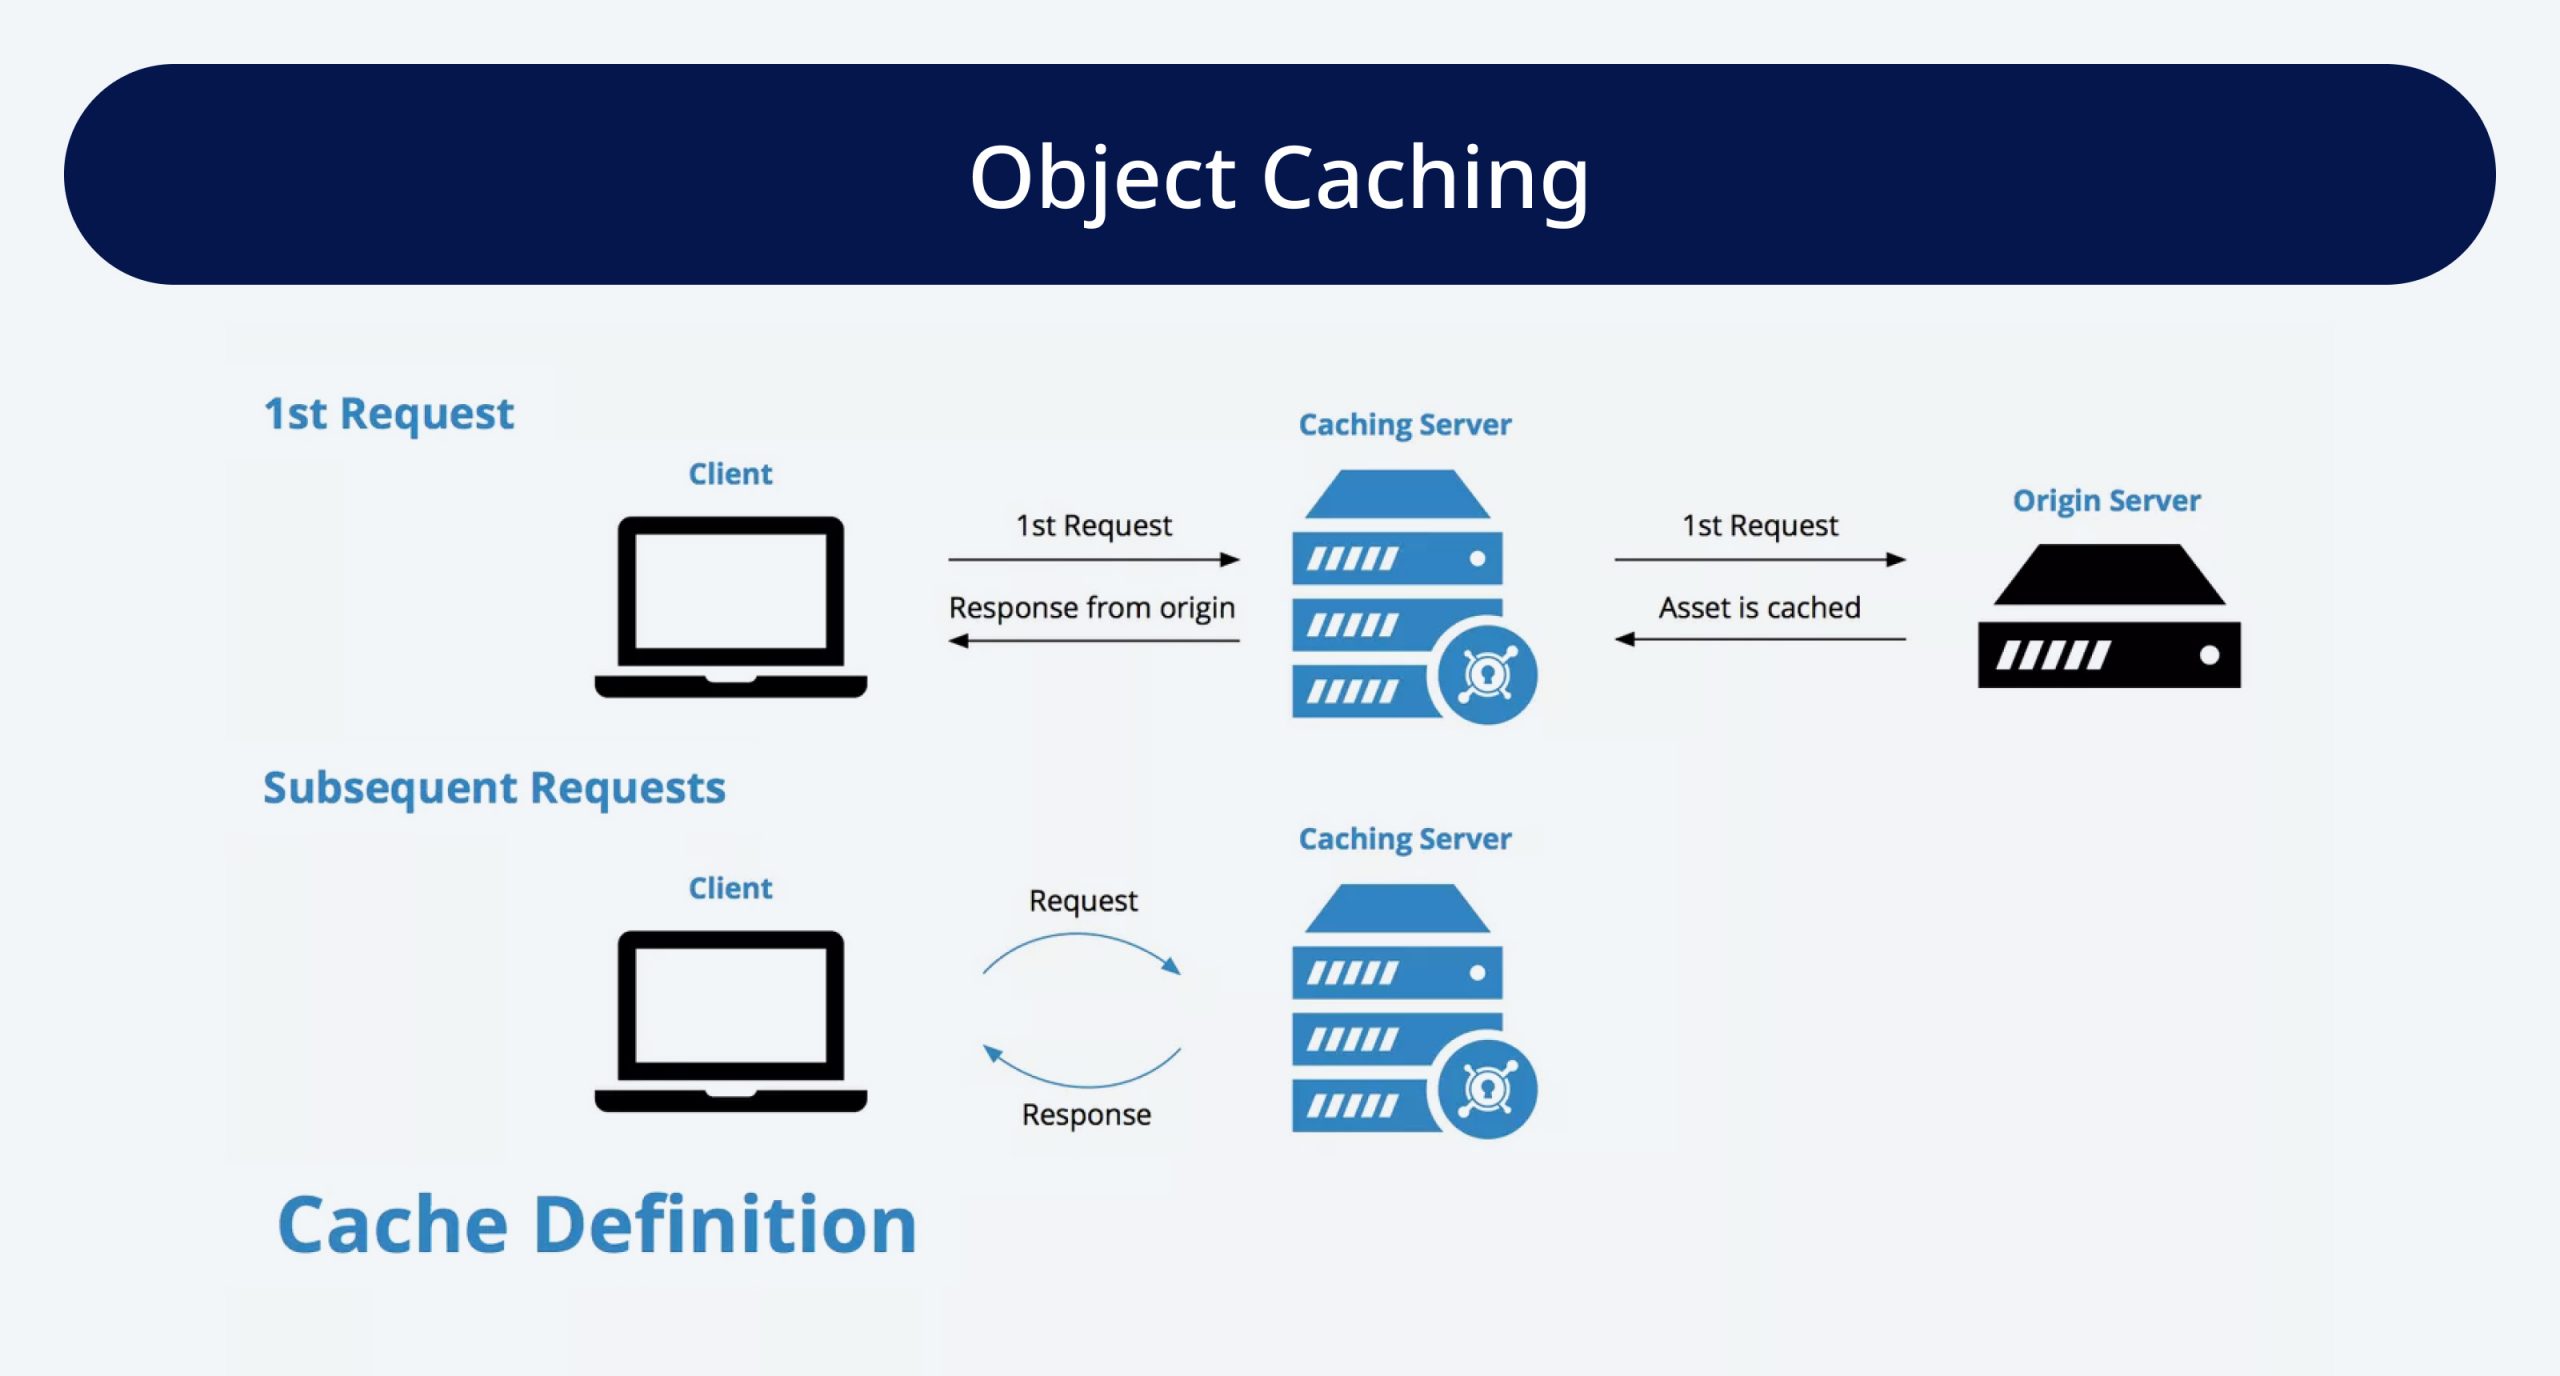 Object Caching